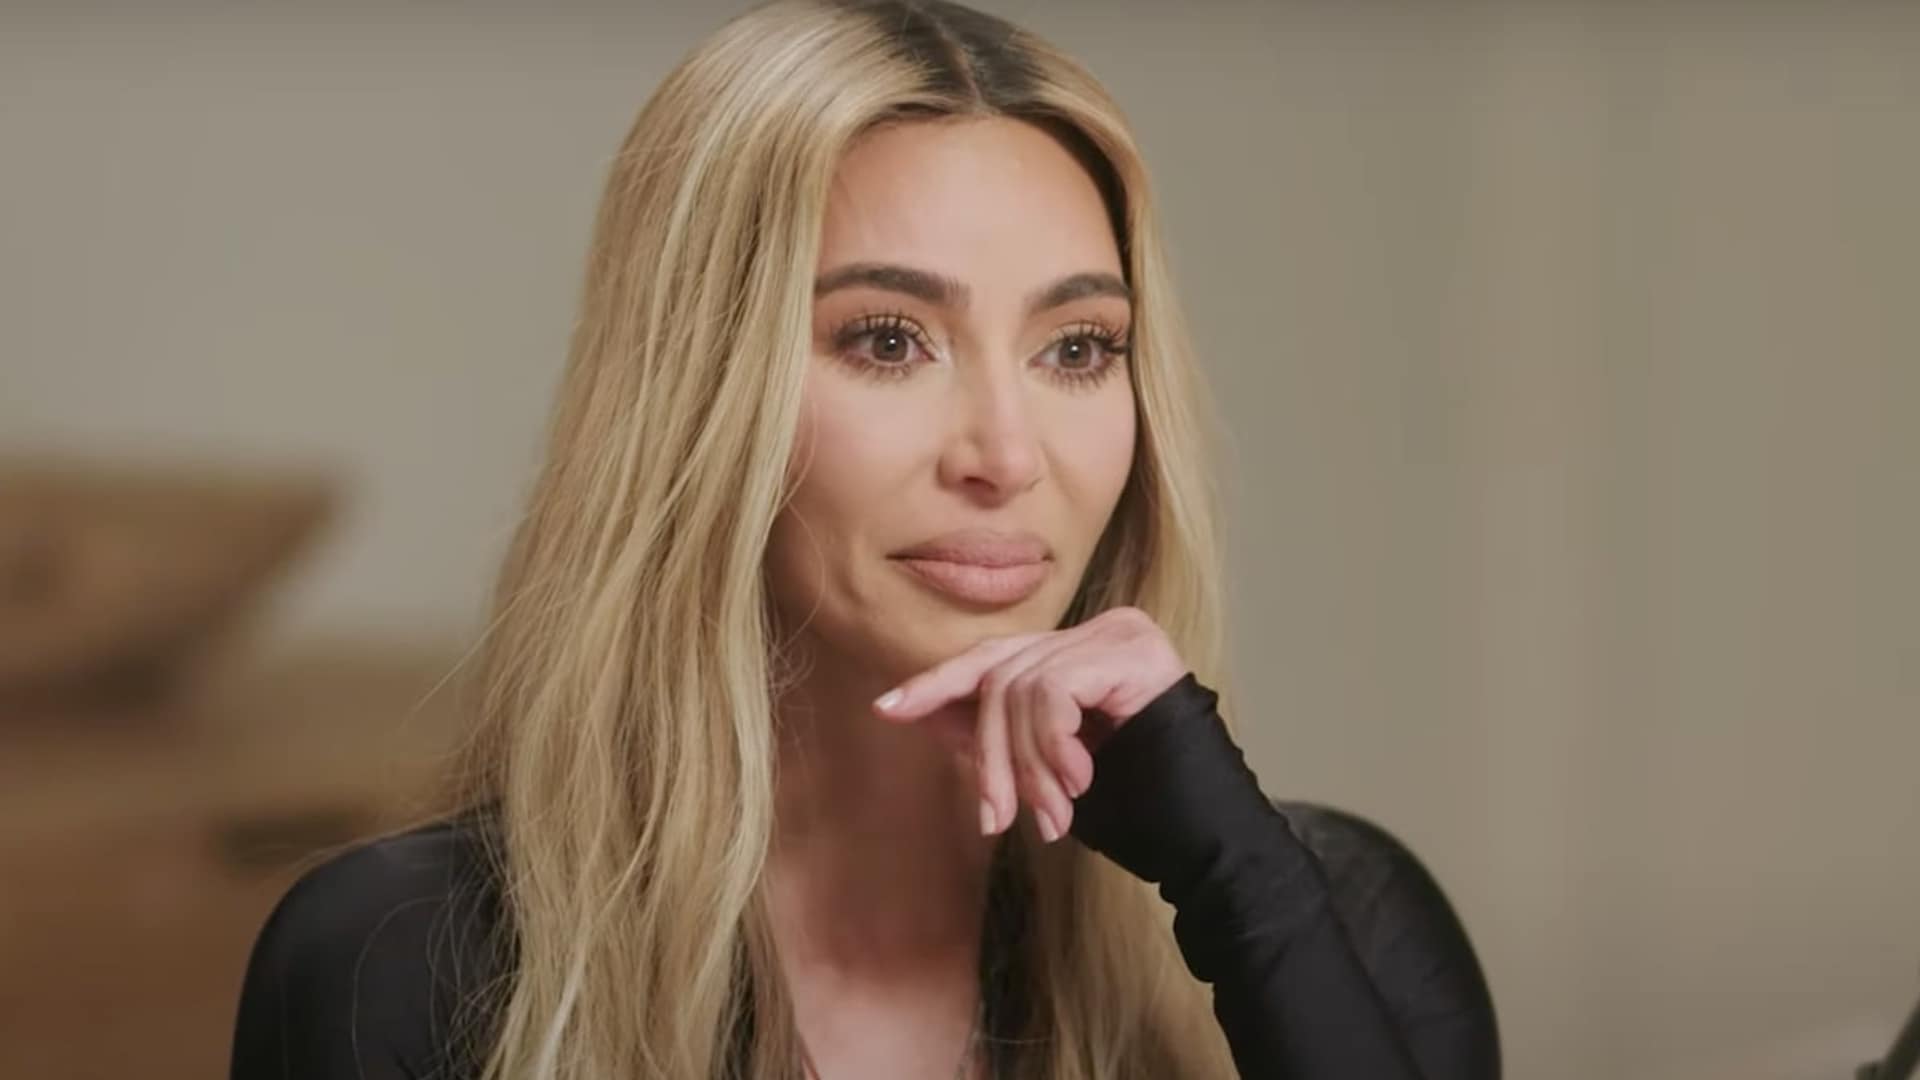 Kim Kardashian was brought to tears while talking about Kanye West on the Angie Martinez IRL podcast